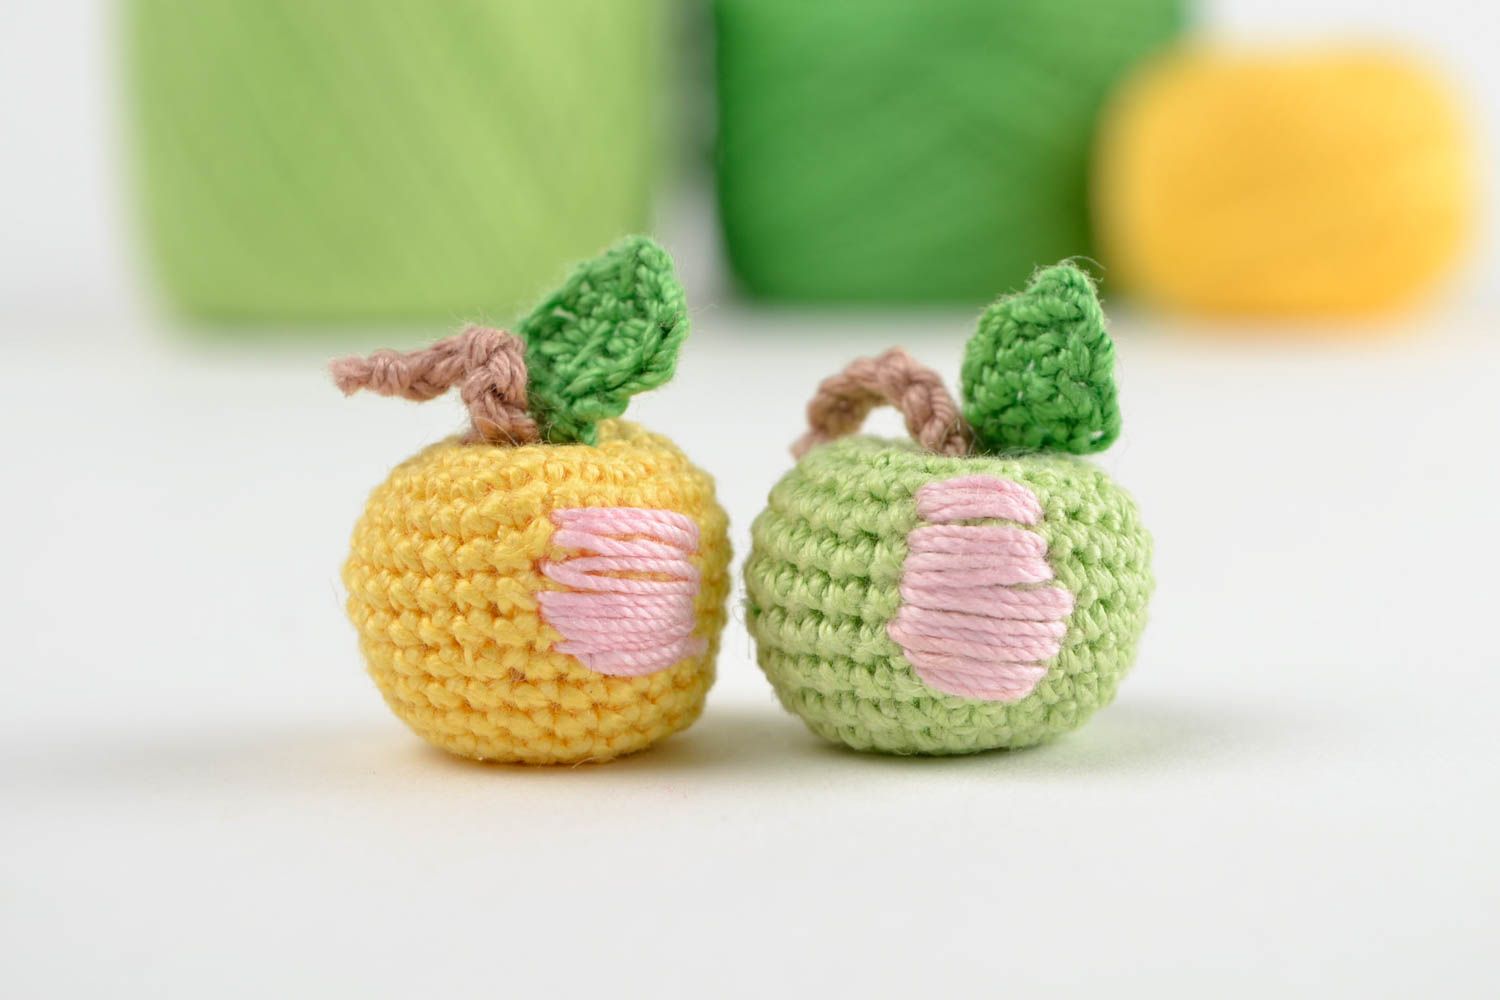 Handmade toy crocheted toy unusual toy for kids designer toy fruit toys photo 1